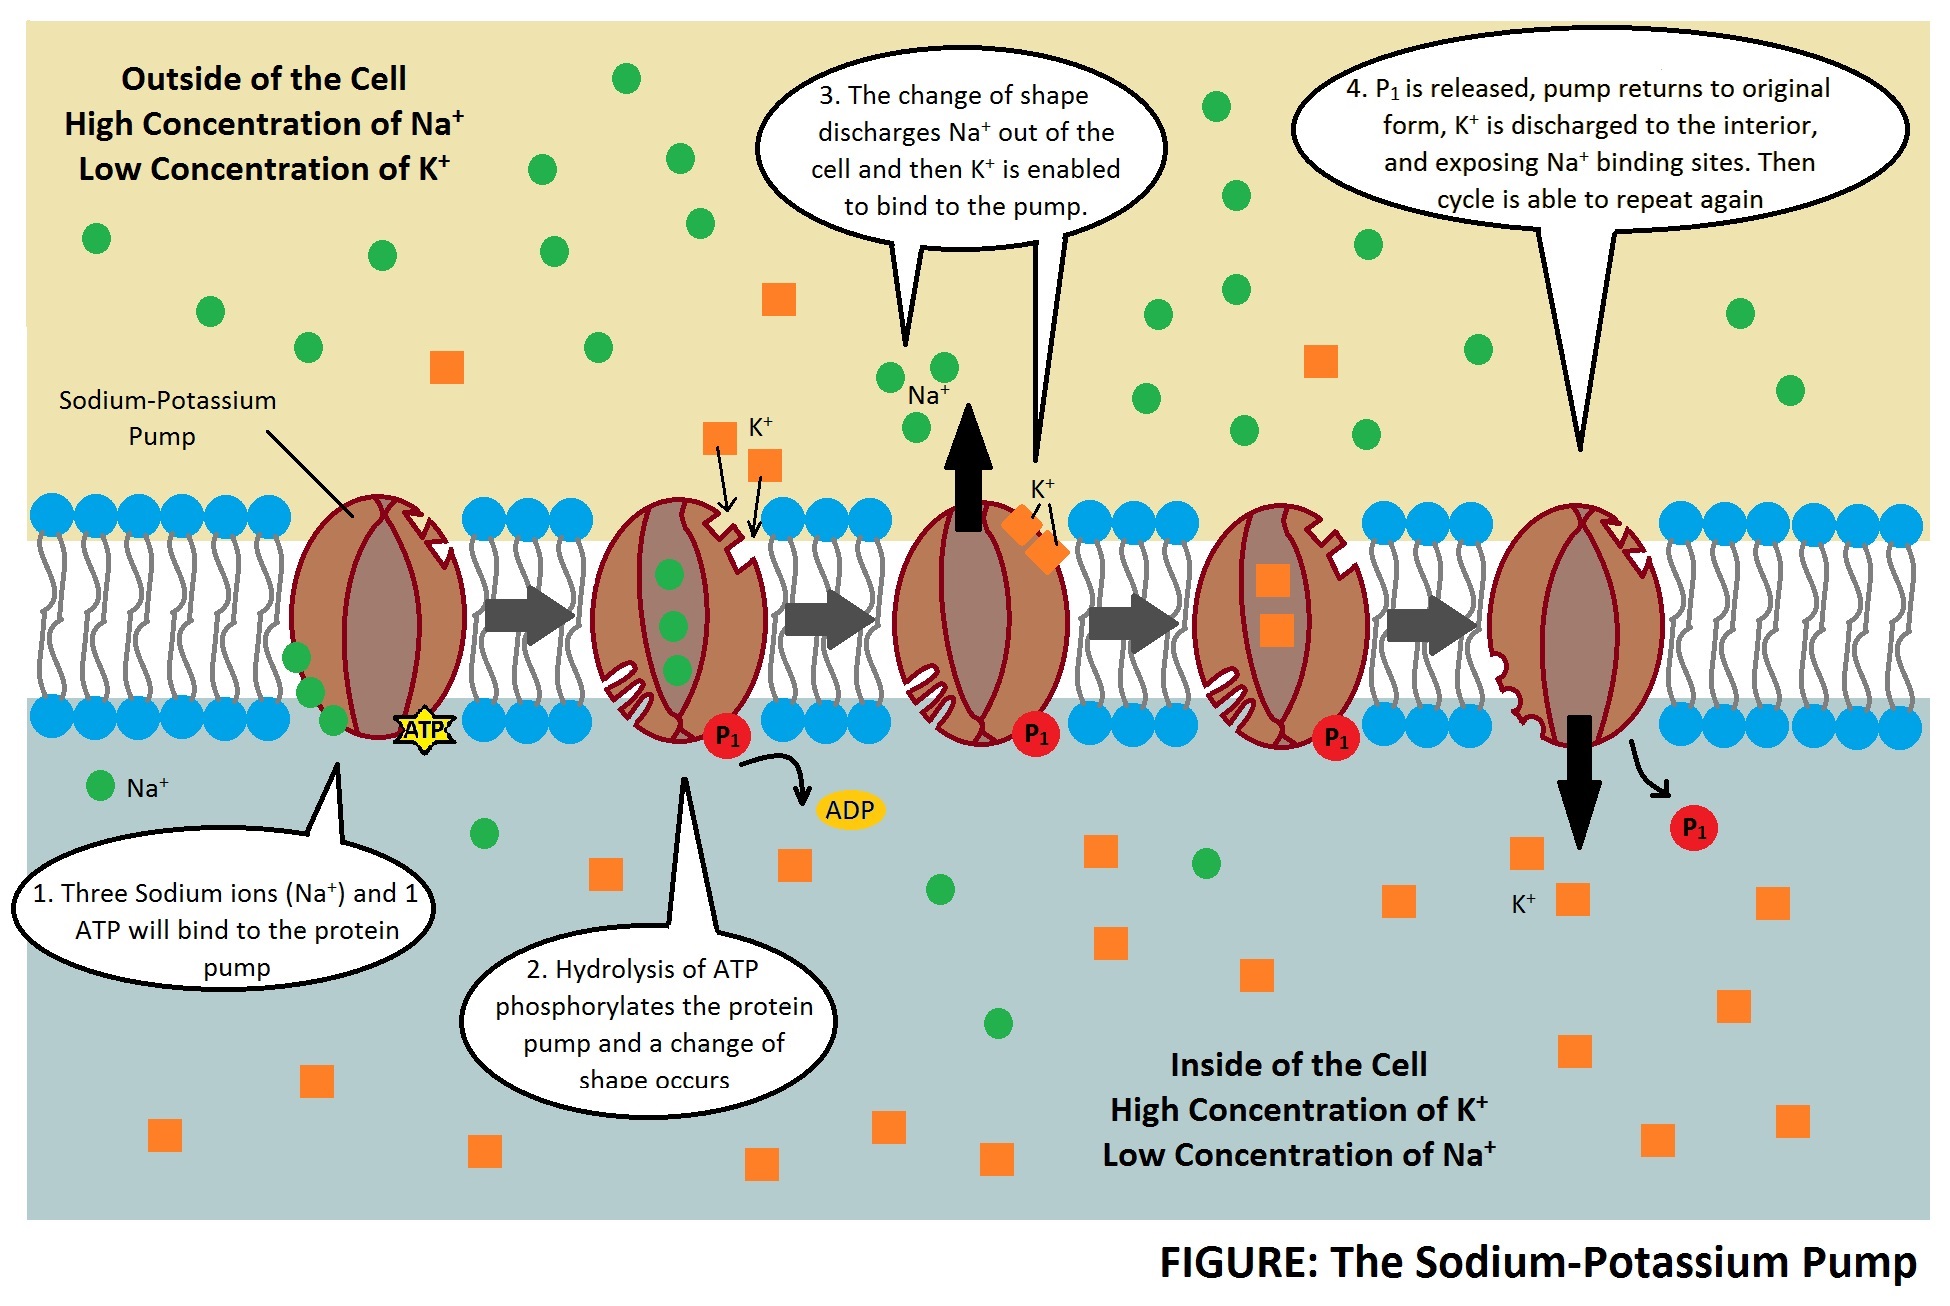 Image of sodium-potassium pumps in the cell membrane showing the steps involved in moving 3 sodium ions out of the cell and 2 potassium ions into the cell.